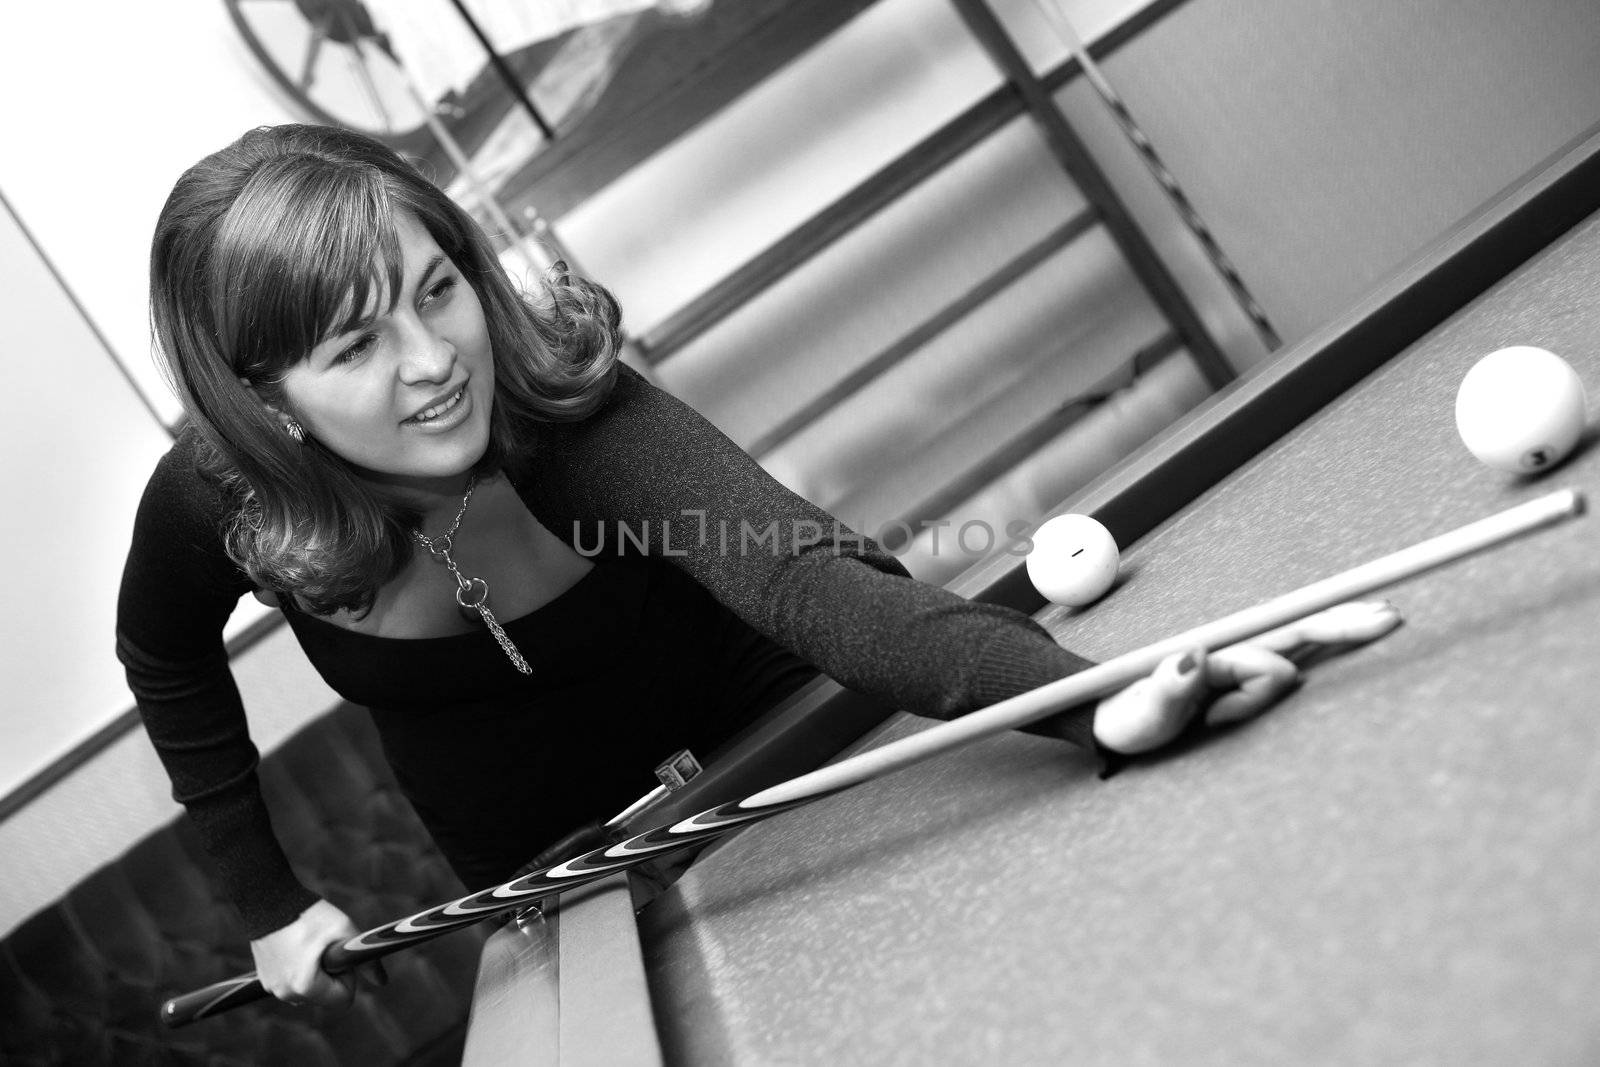 The pregnant woman plays on billiards